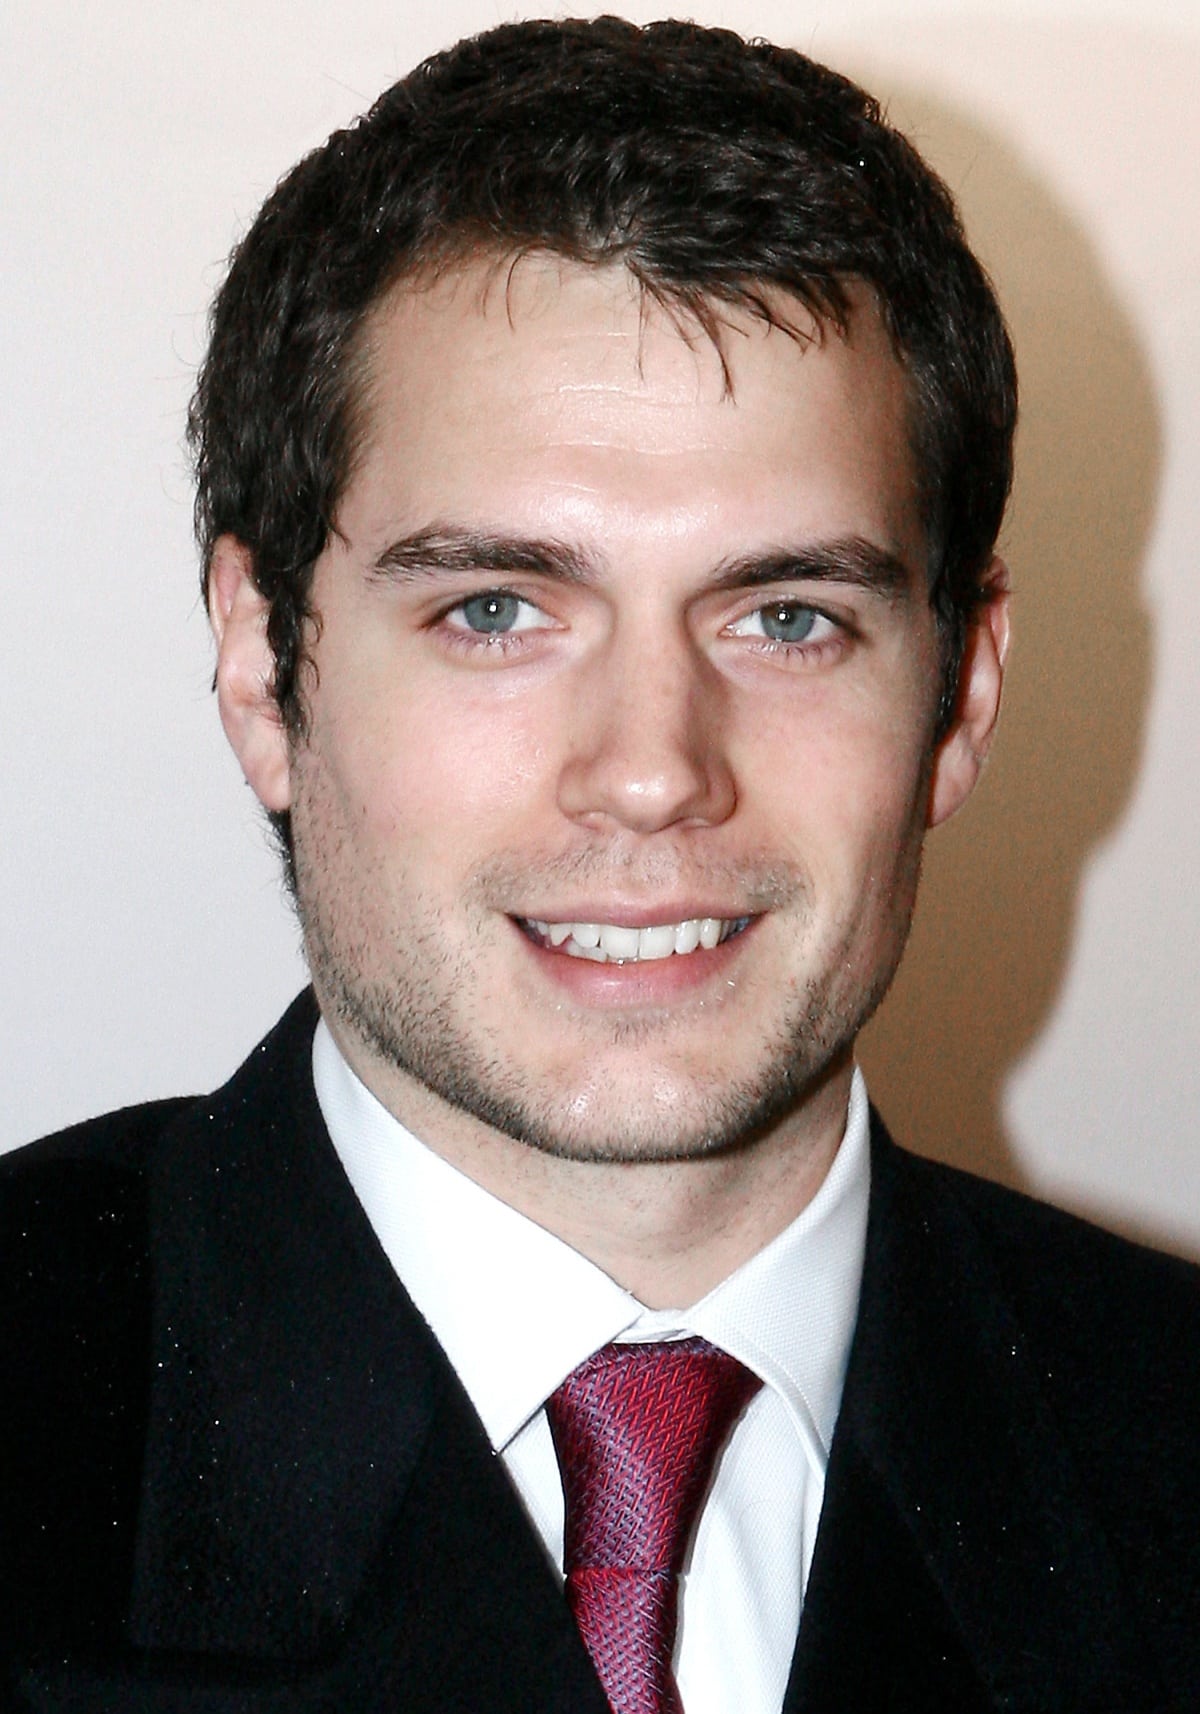 Henry Cavill’s on-screen debut is as Thomas Aprea in the 2001 mob drama entitled Laguna